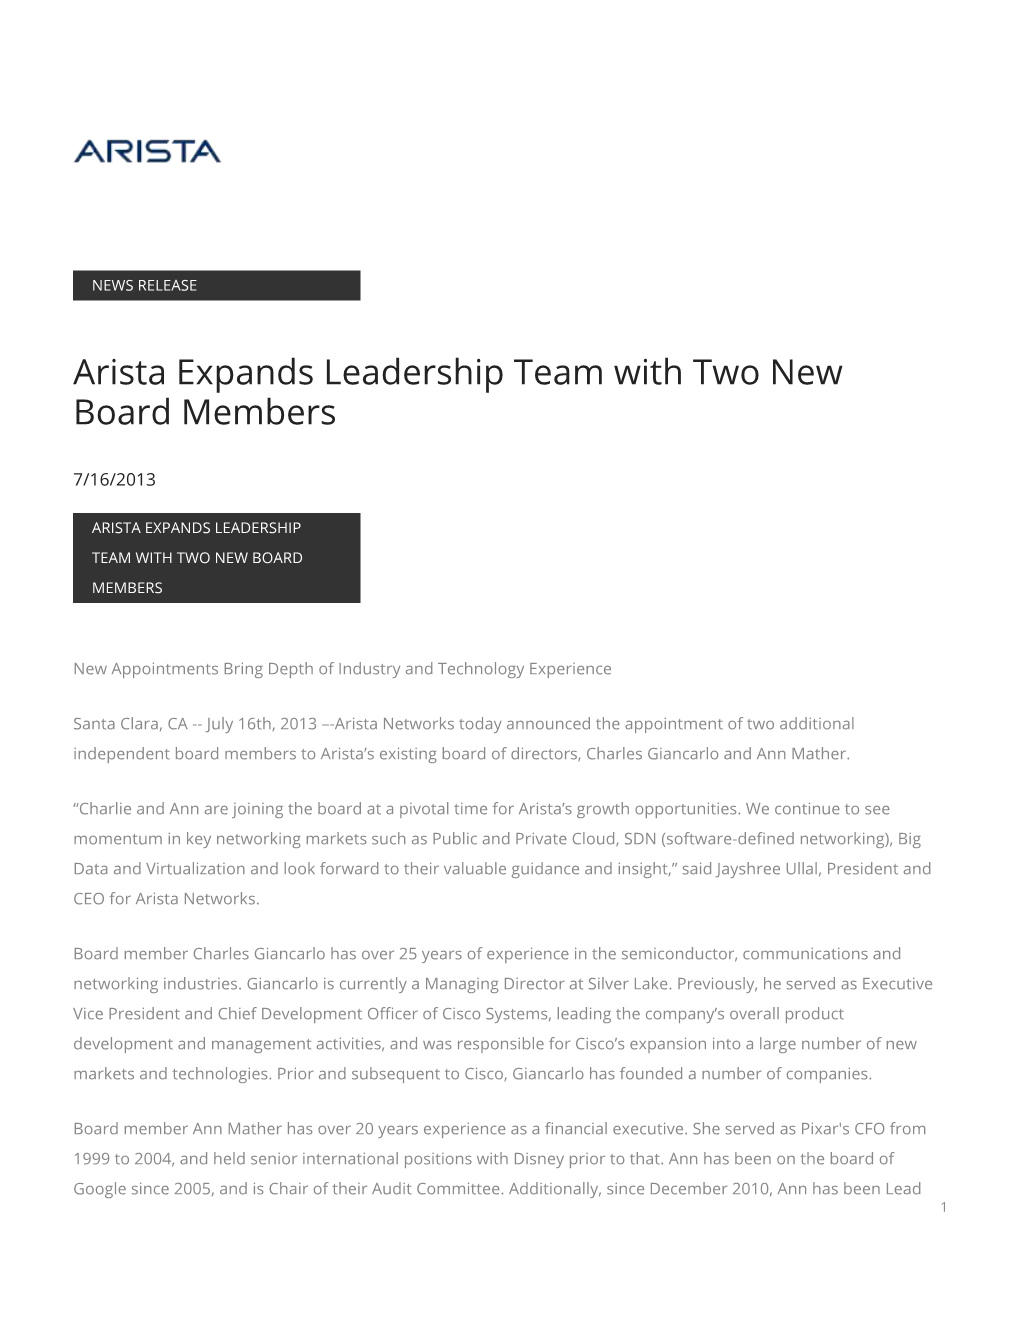 Arista Expands Leadership Team with Two New Board Members